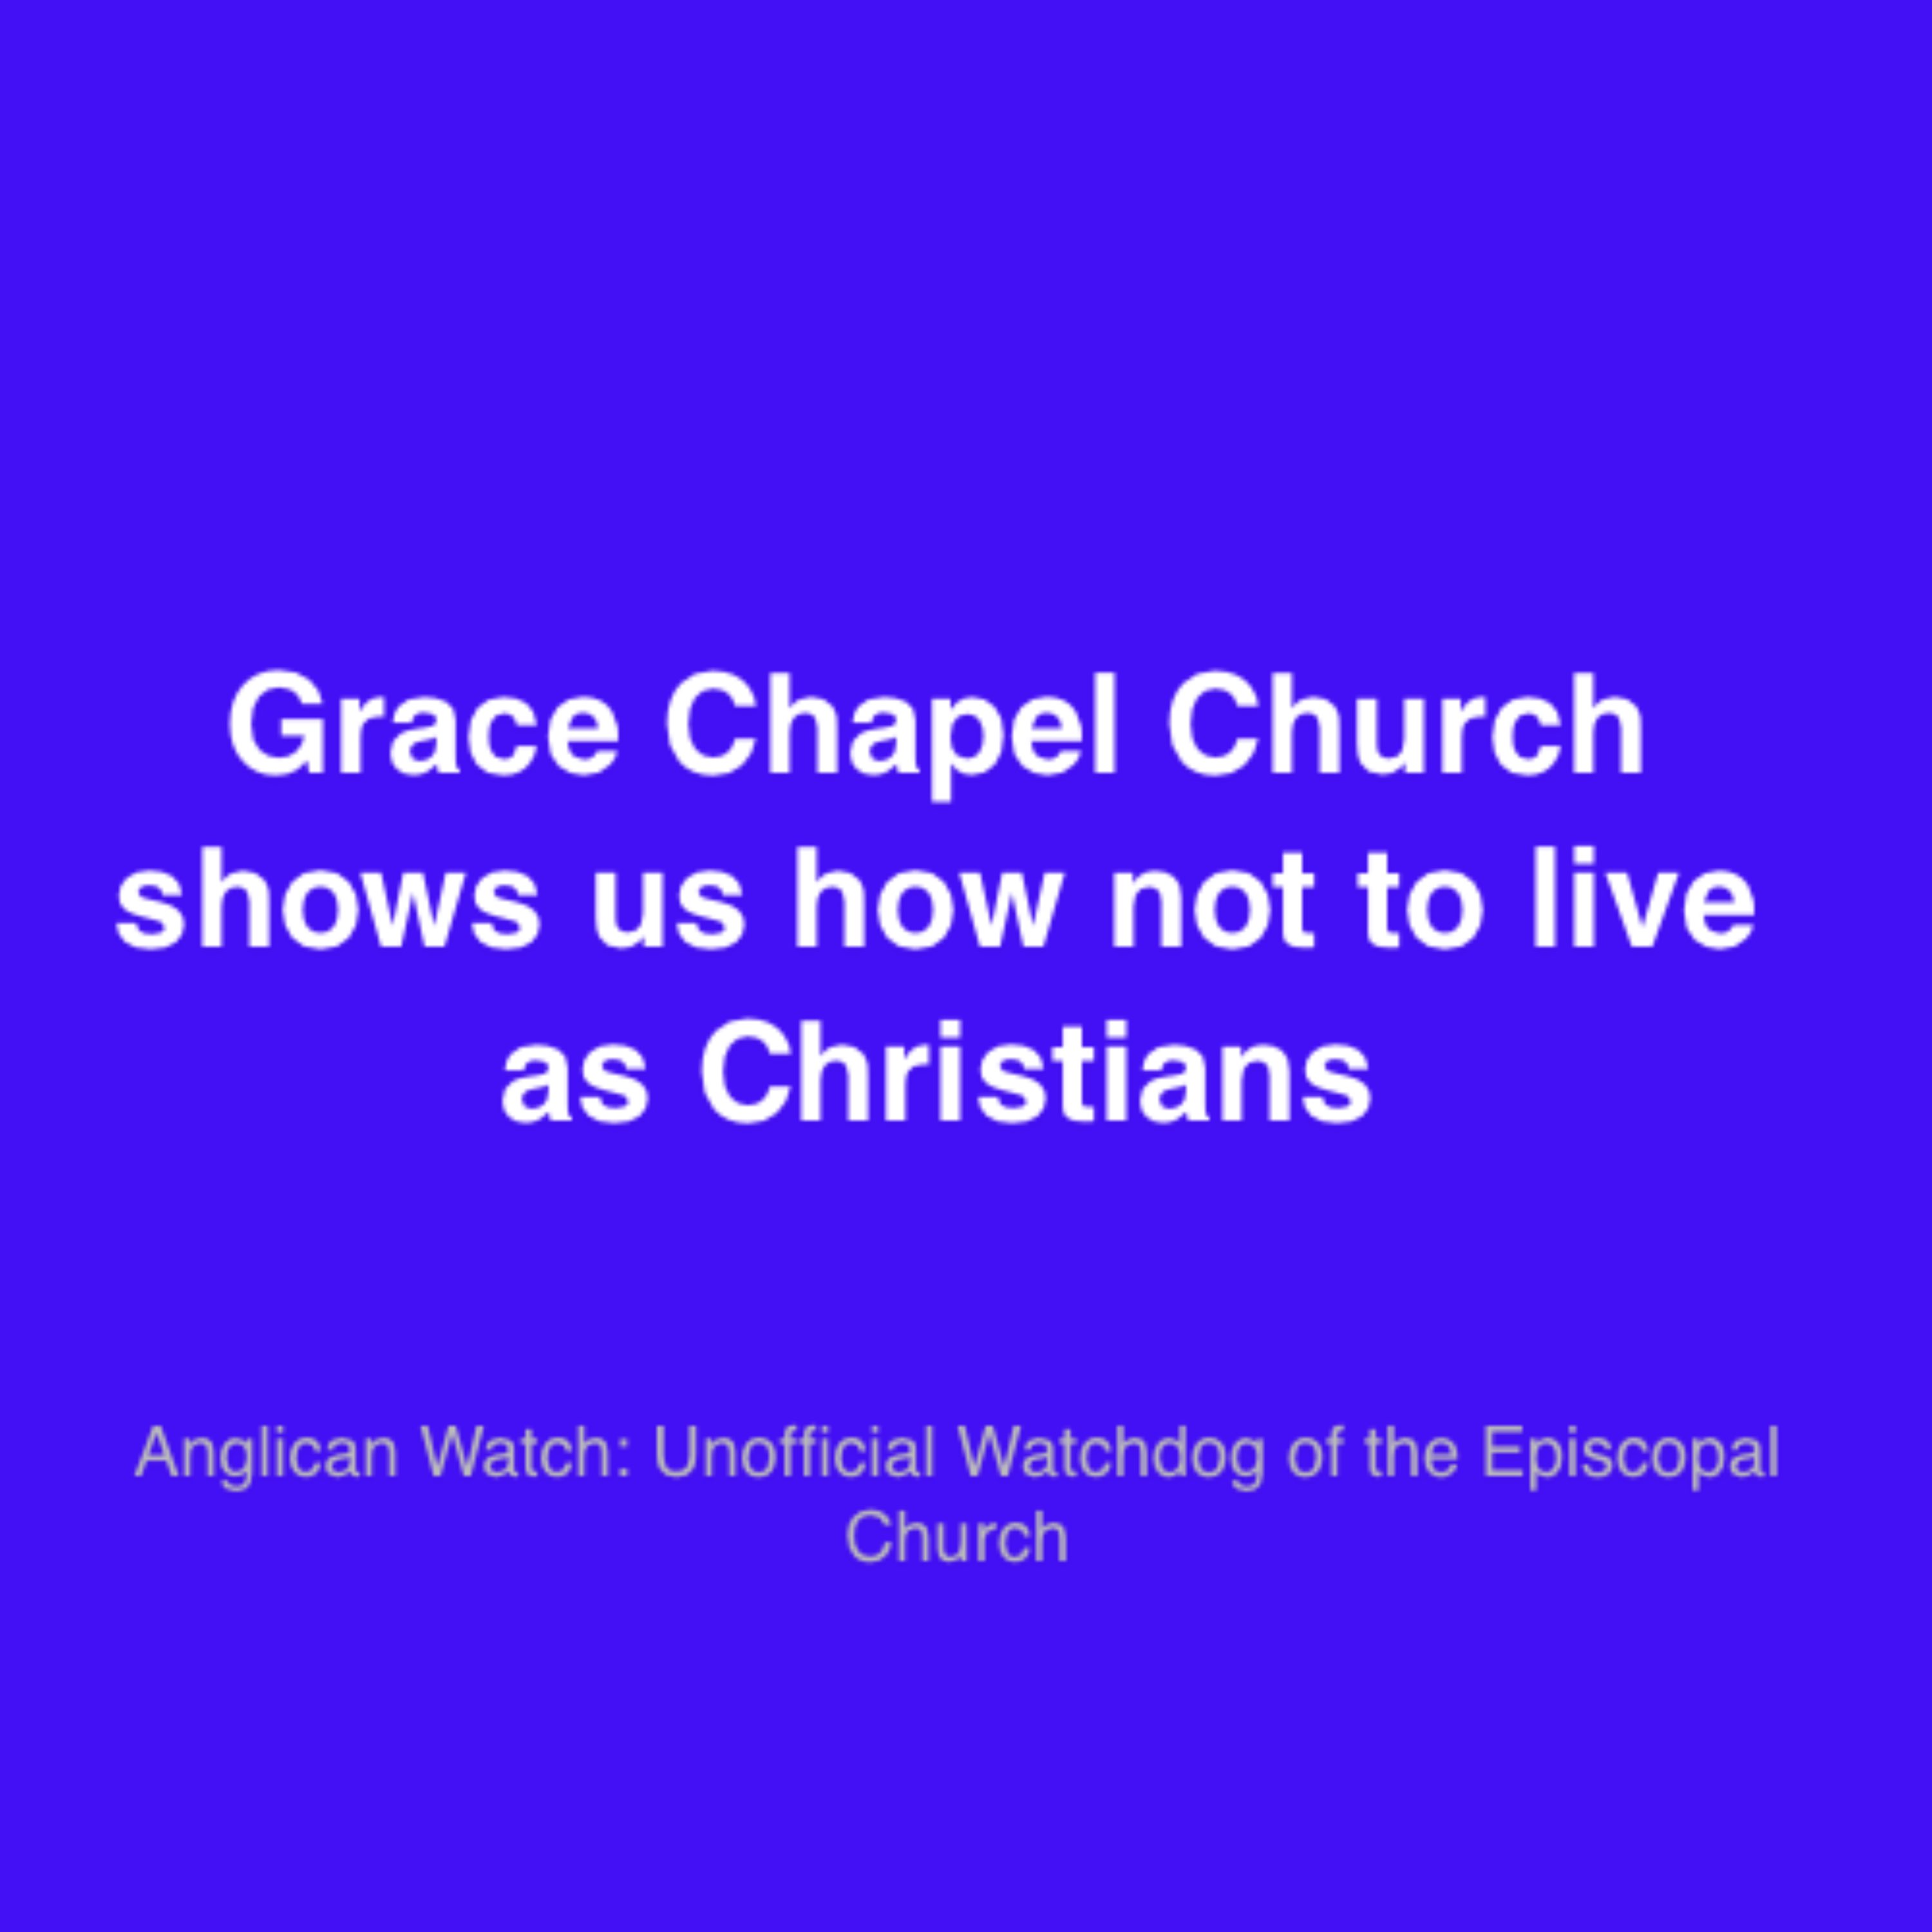 Grace Chapel Church shows us how not to live as Christians